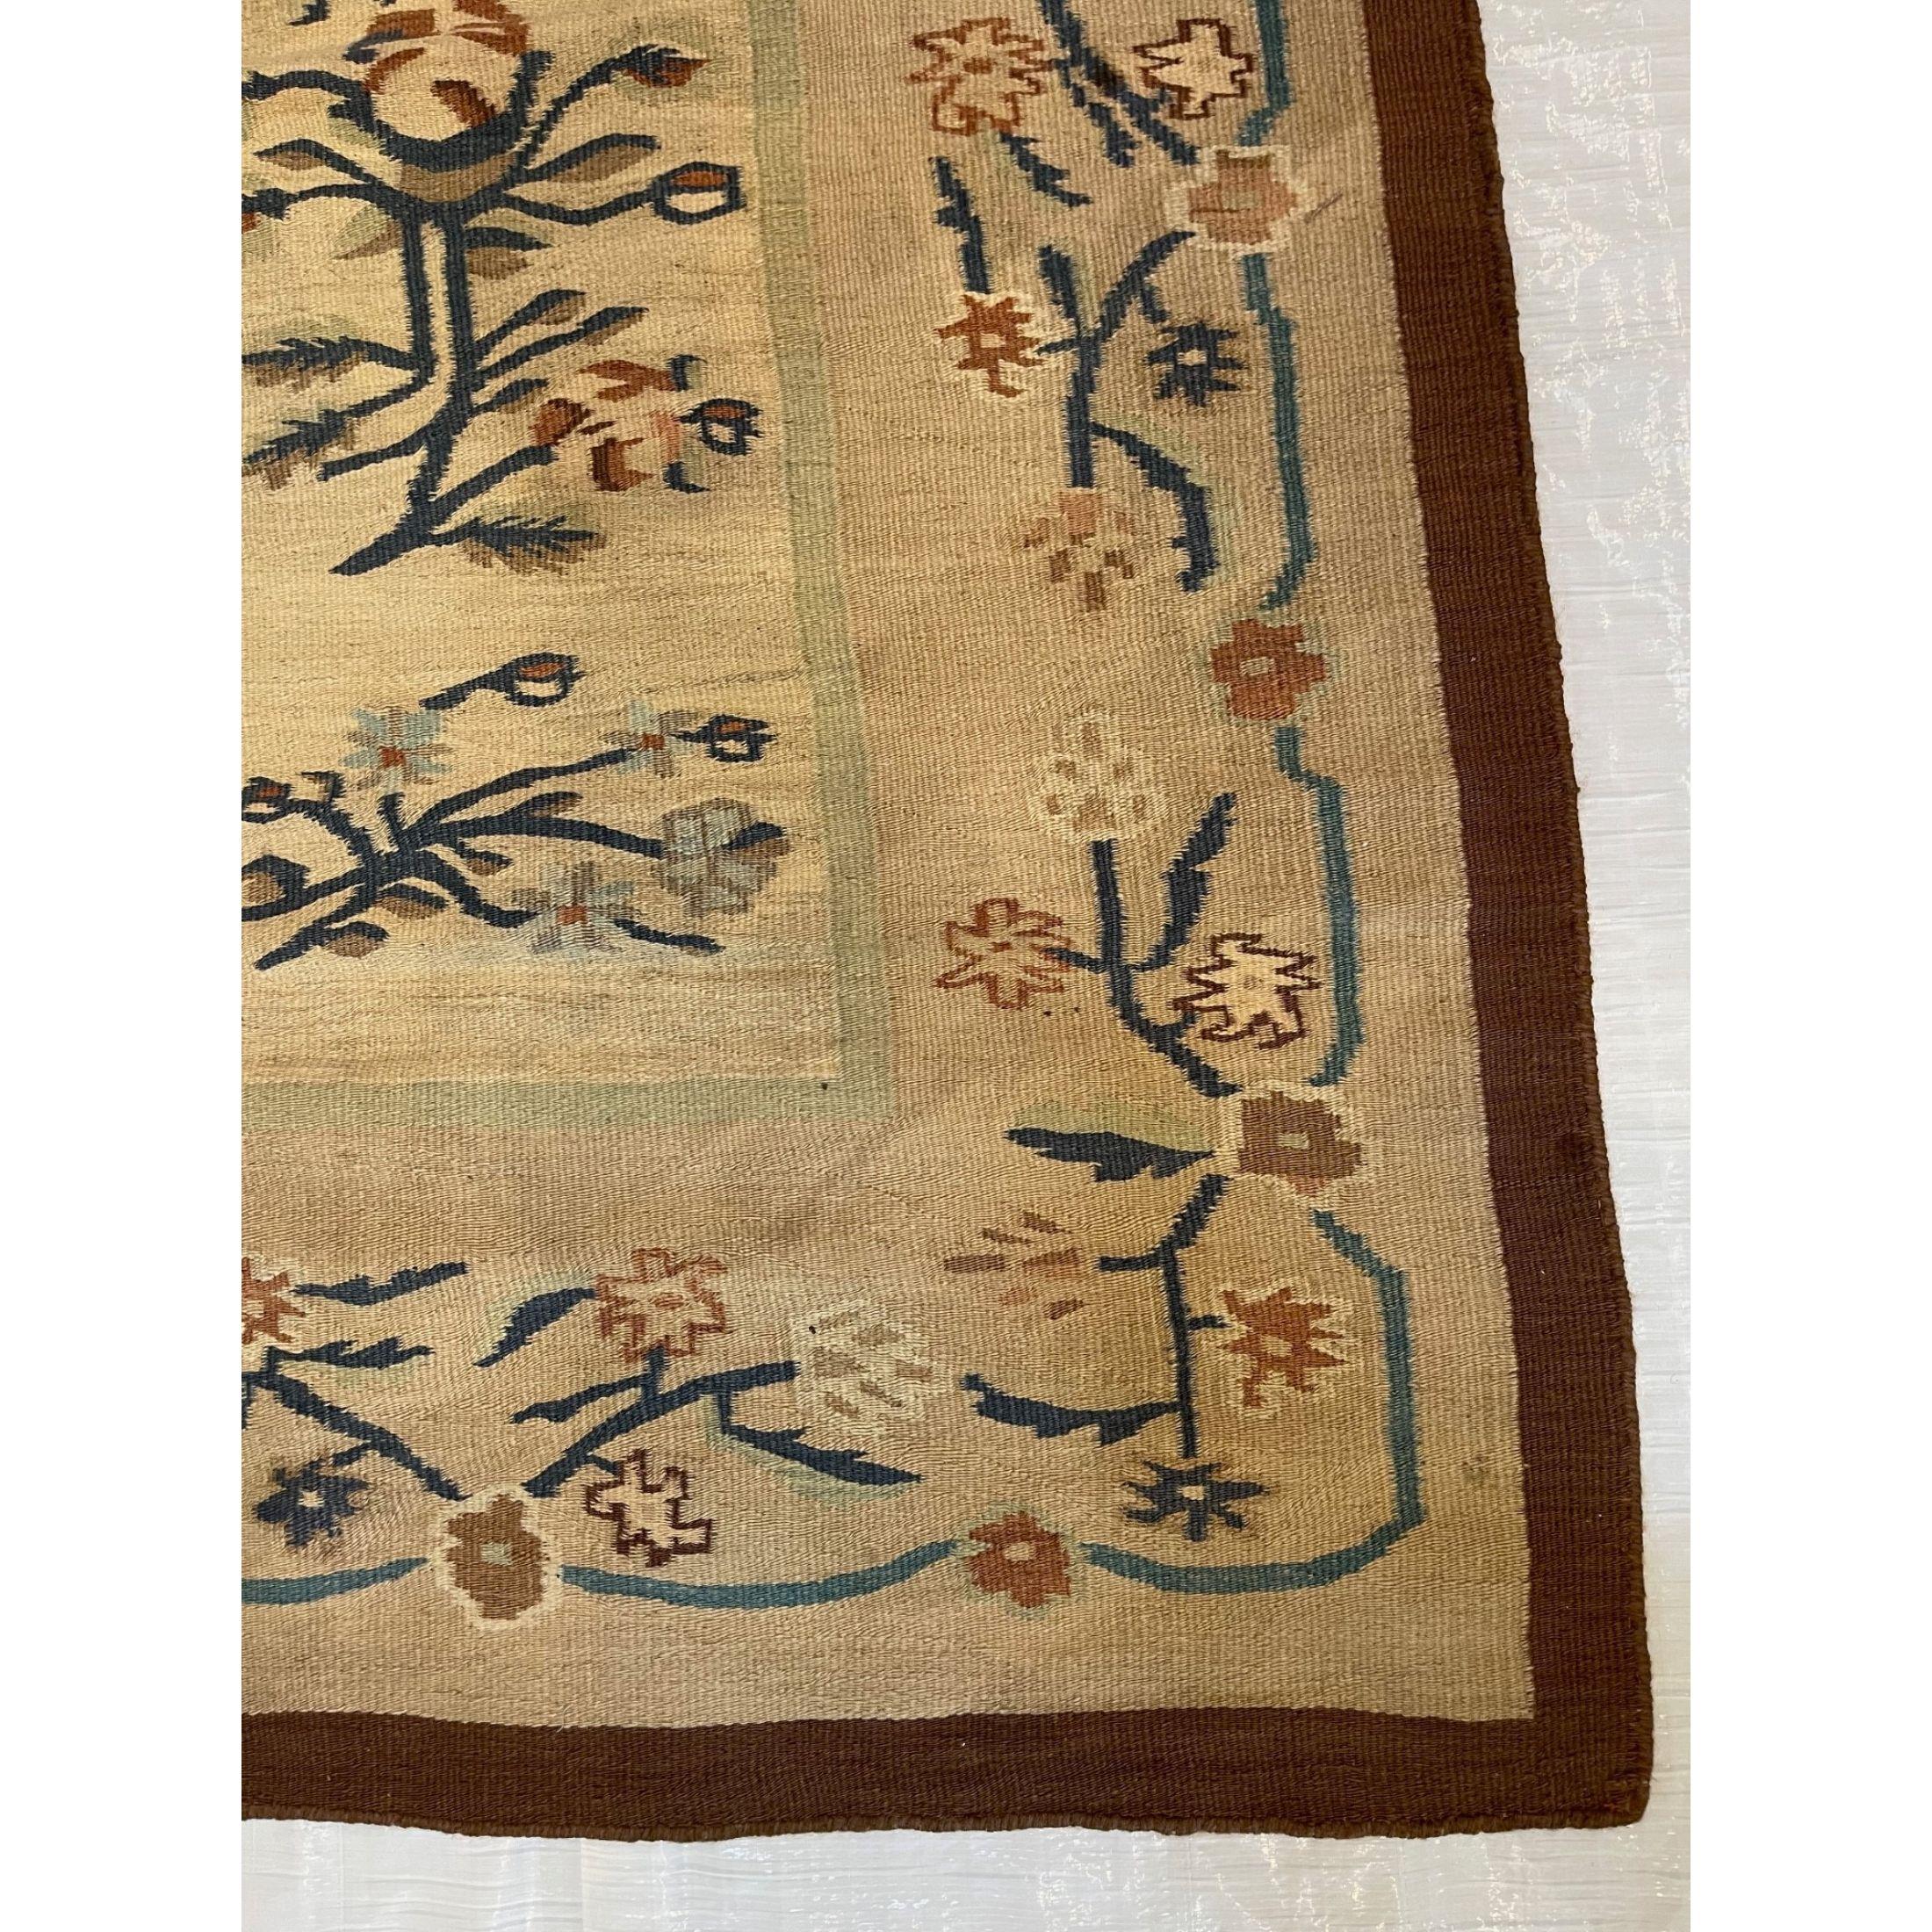 Other Early 20th Century Antique Floral Bessarabian Kilim Rug For Sale